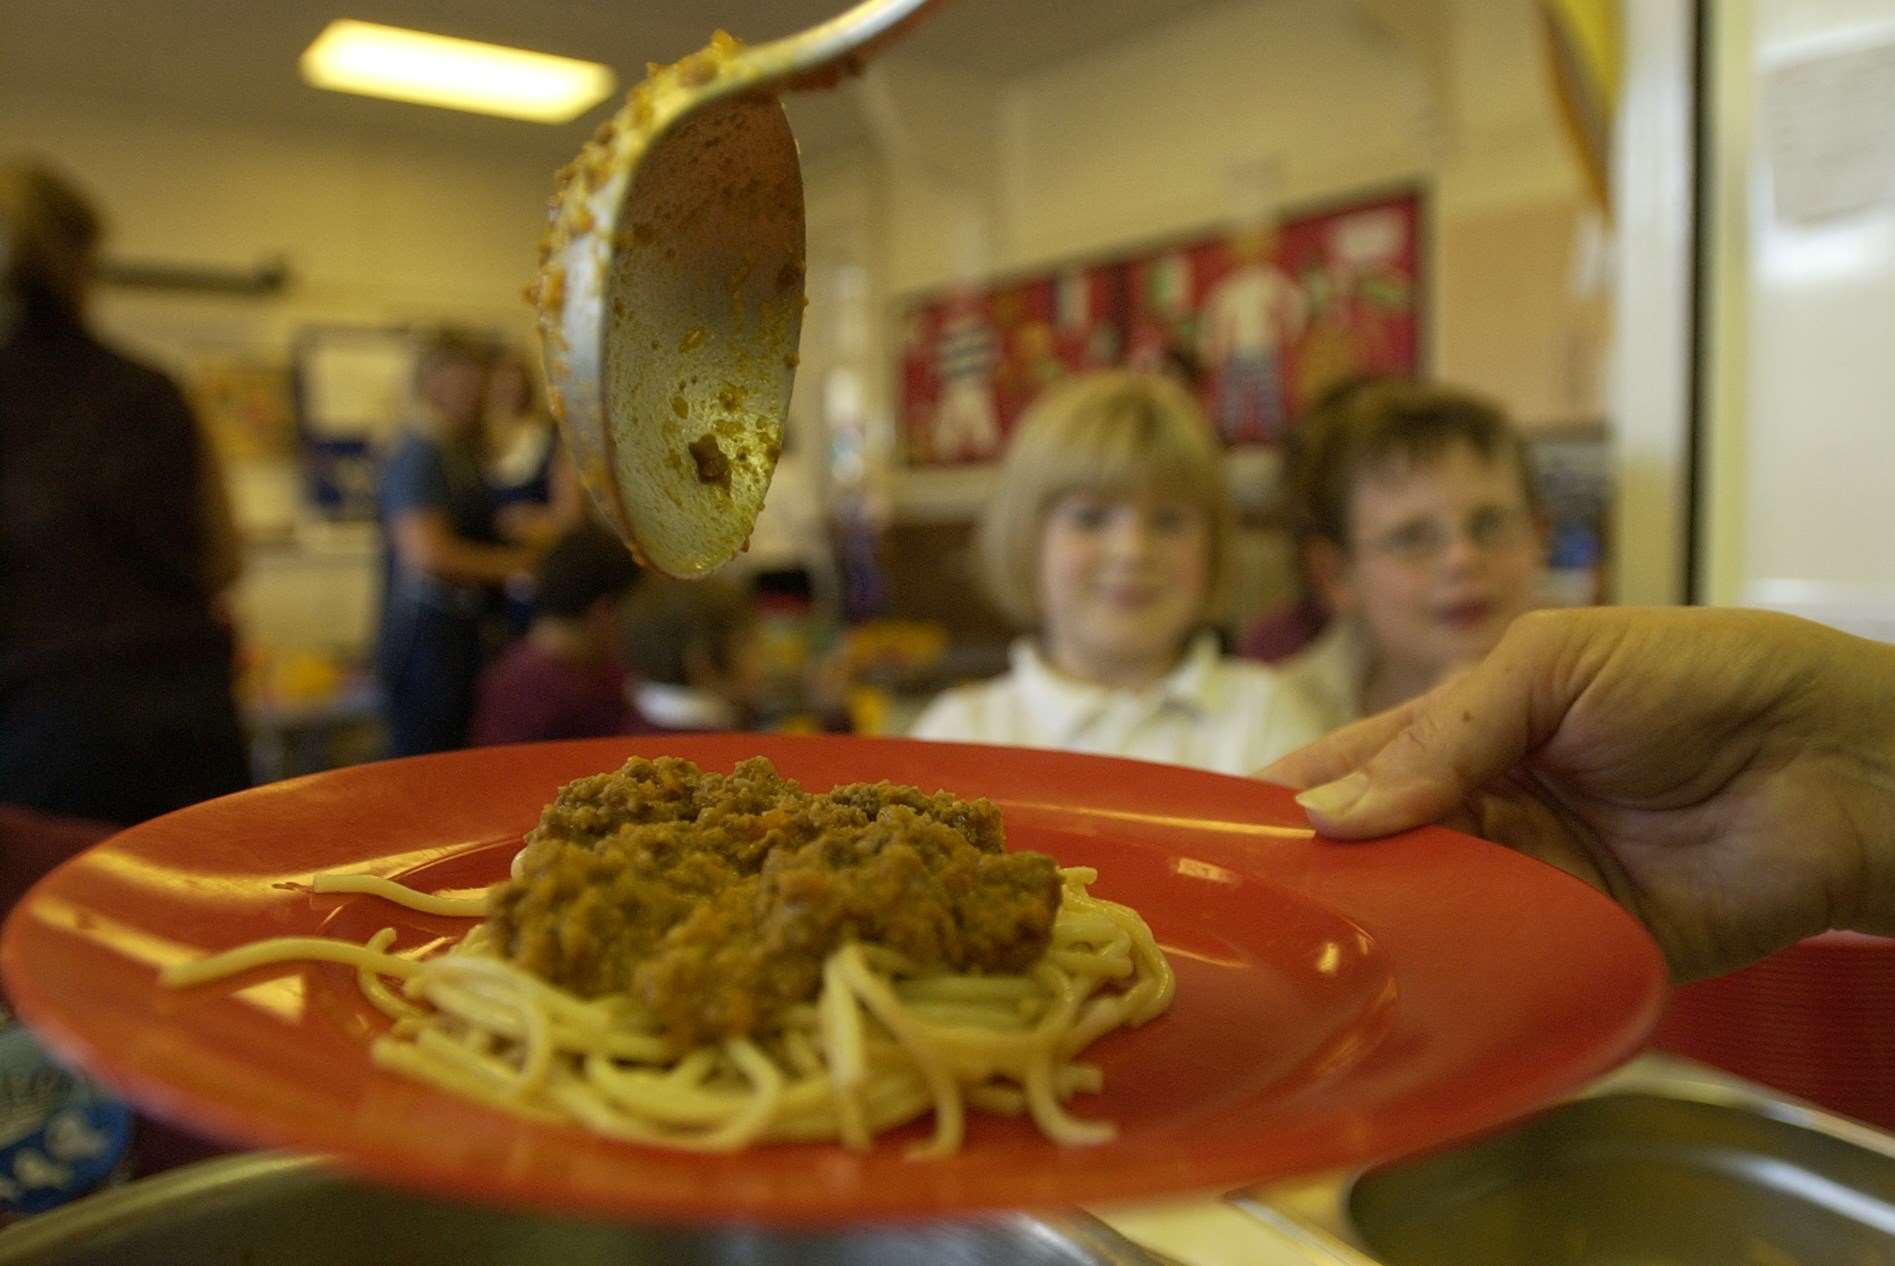 The Contract Dining Company serves more than 8,000 school meals a day